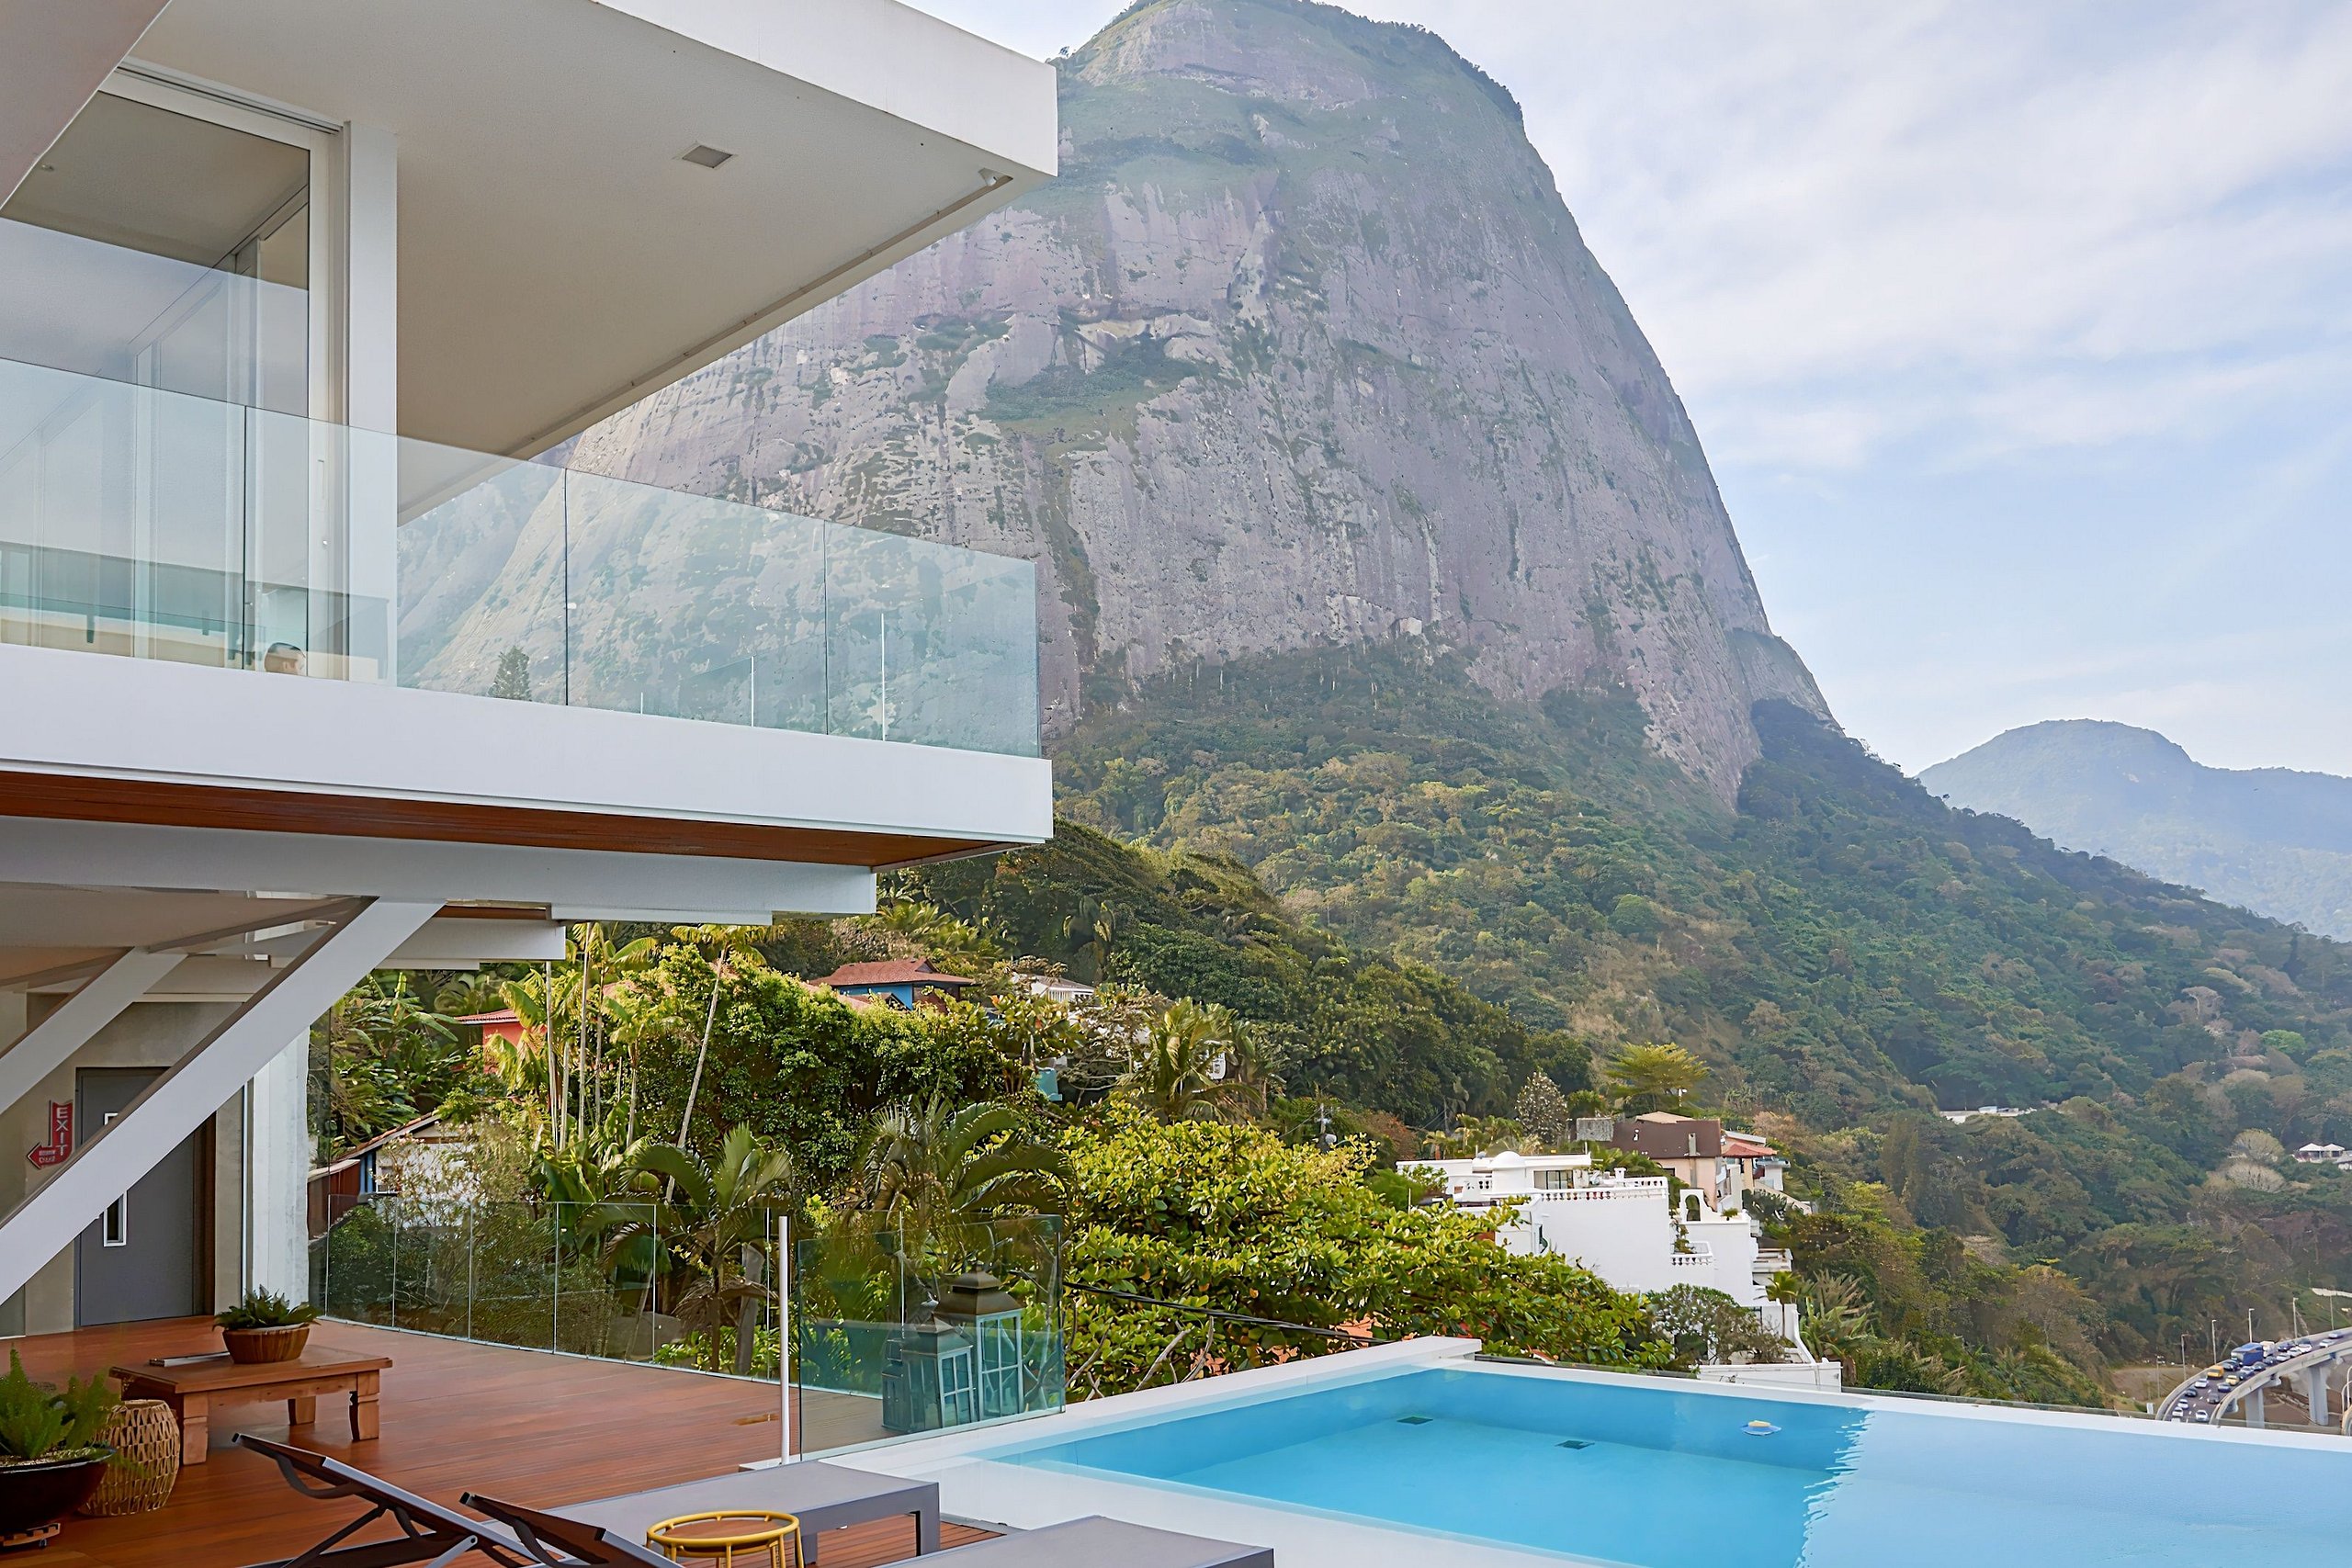 Property Image 1 - Villa with fantastic view of the Morro dois Irmãos